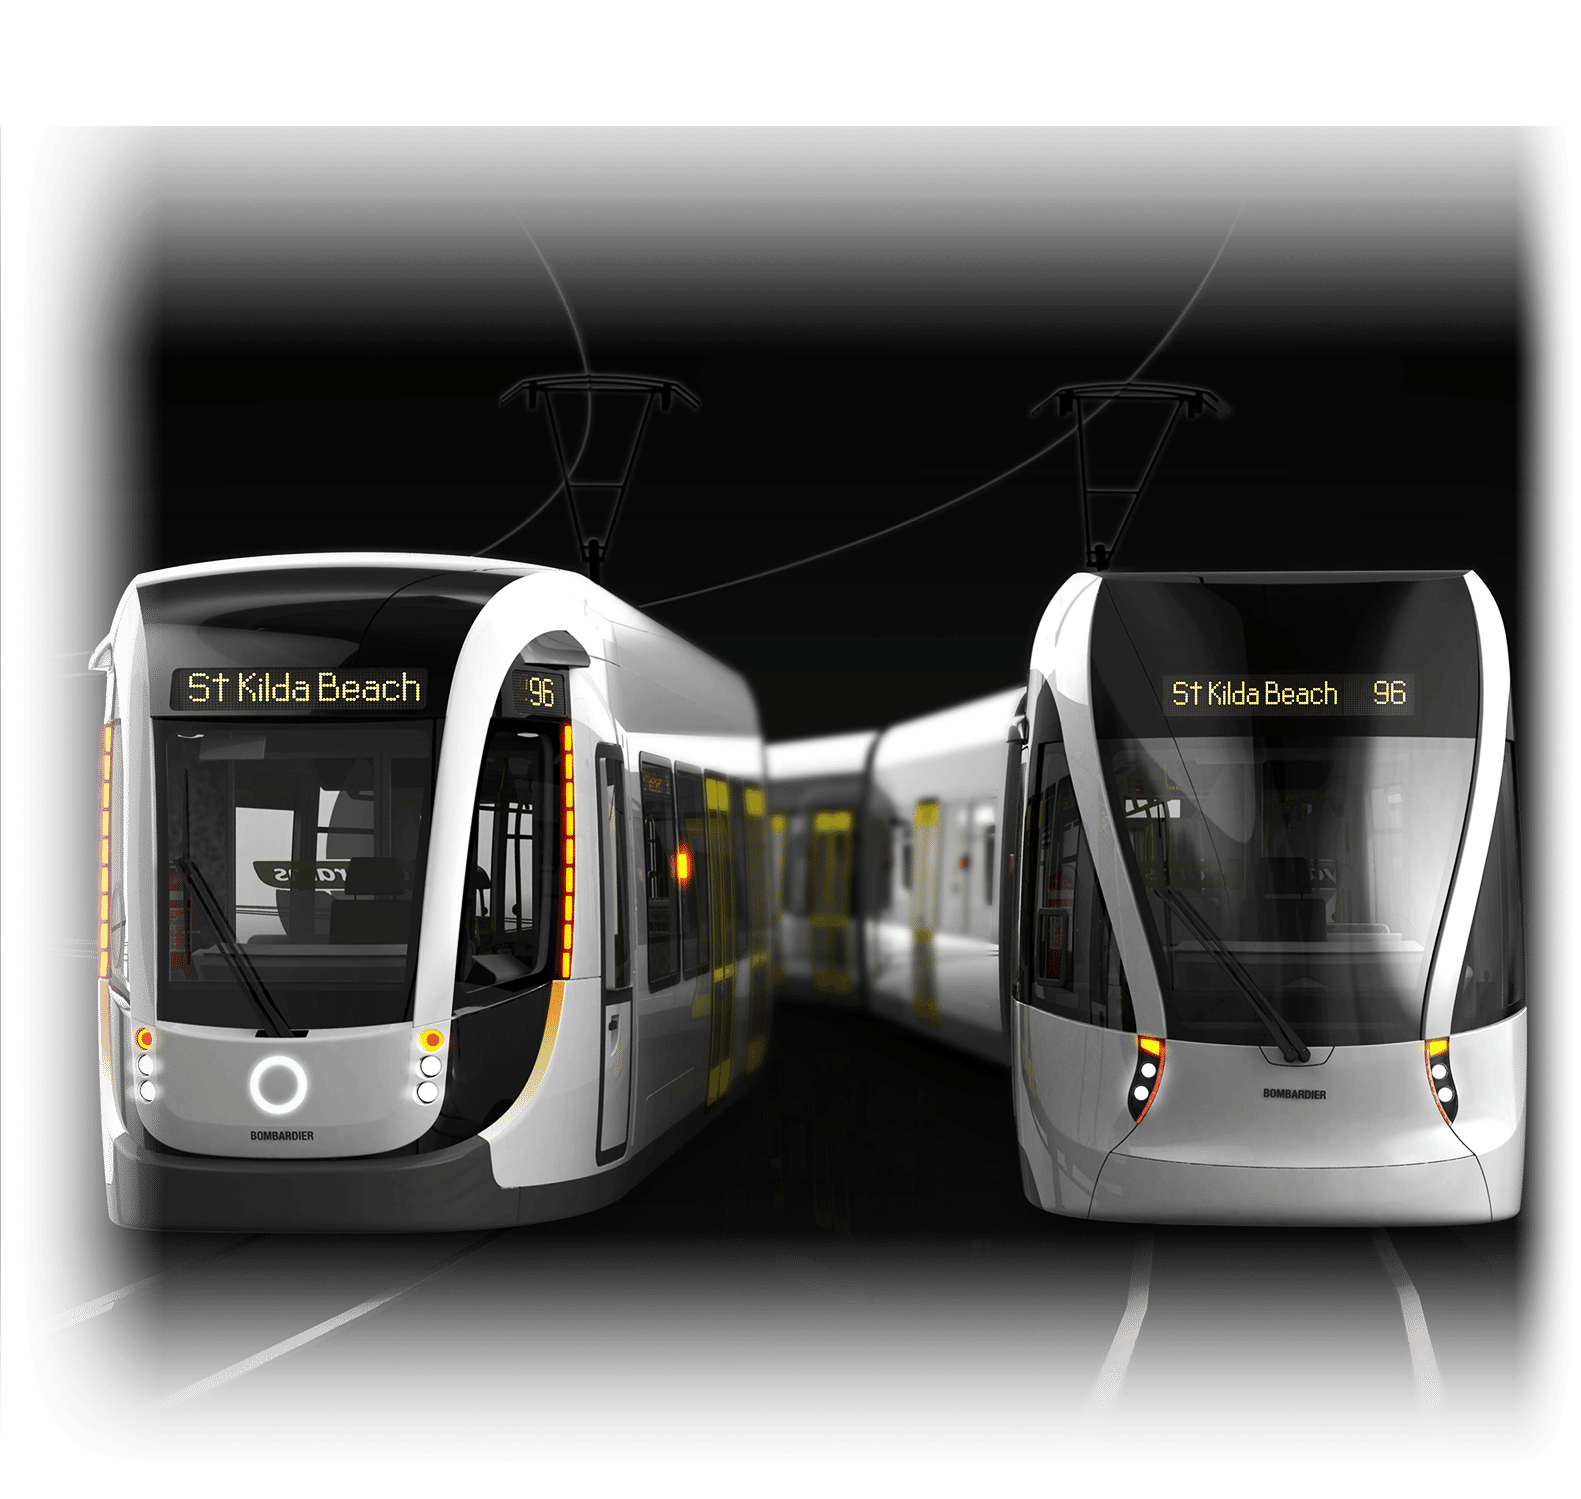 Render of two Melbourne tram designs operating side by side